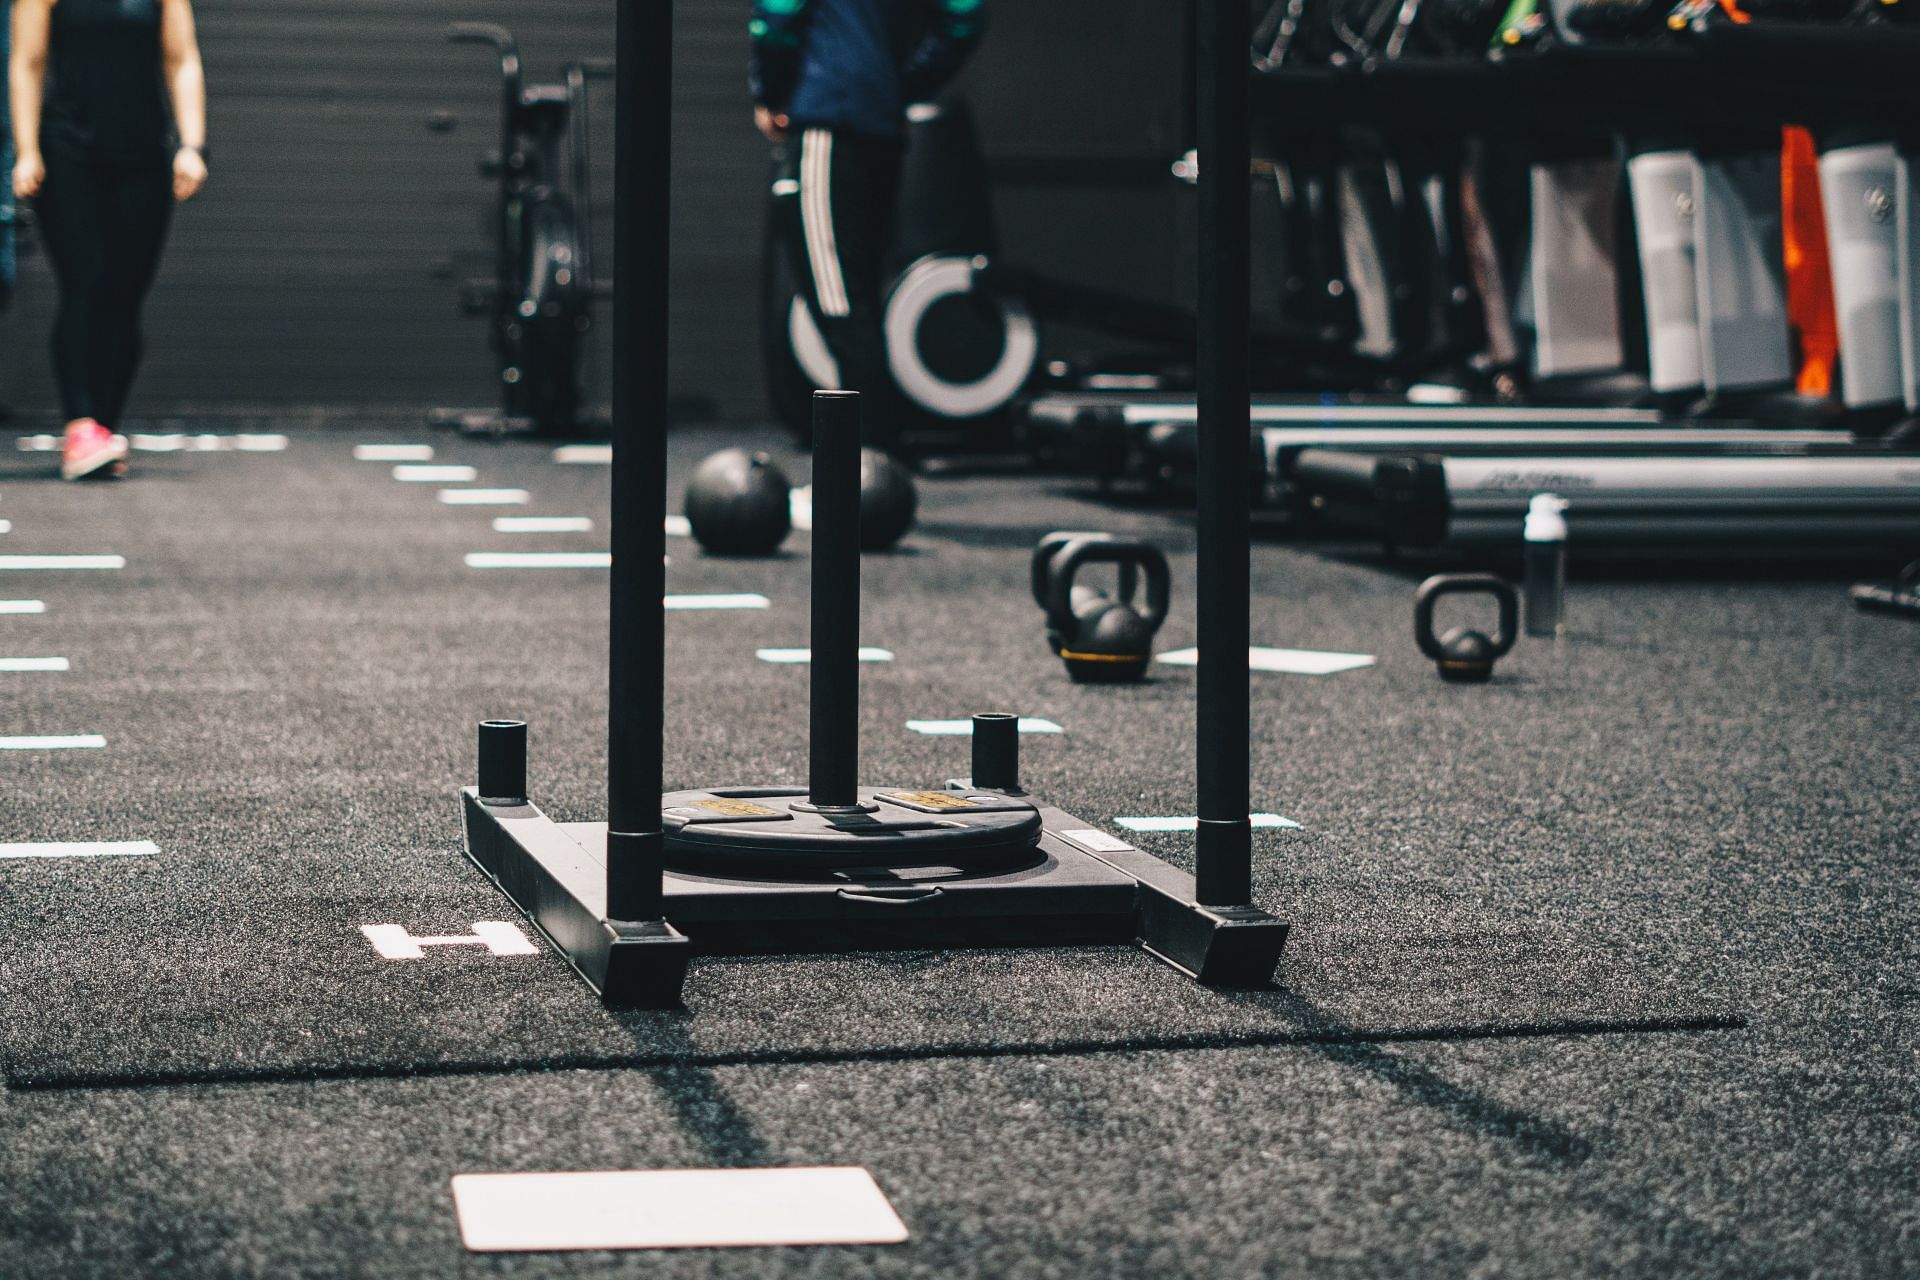 Sled push exercises are a good way to build muscular strength (Image via Unsplash @ Ambitious Creative)